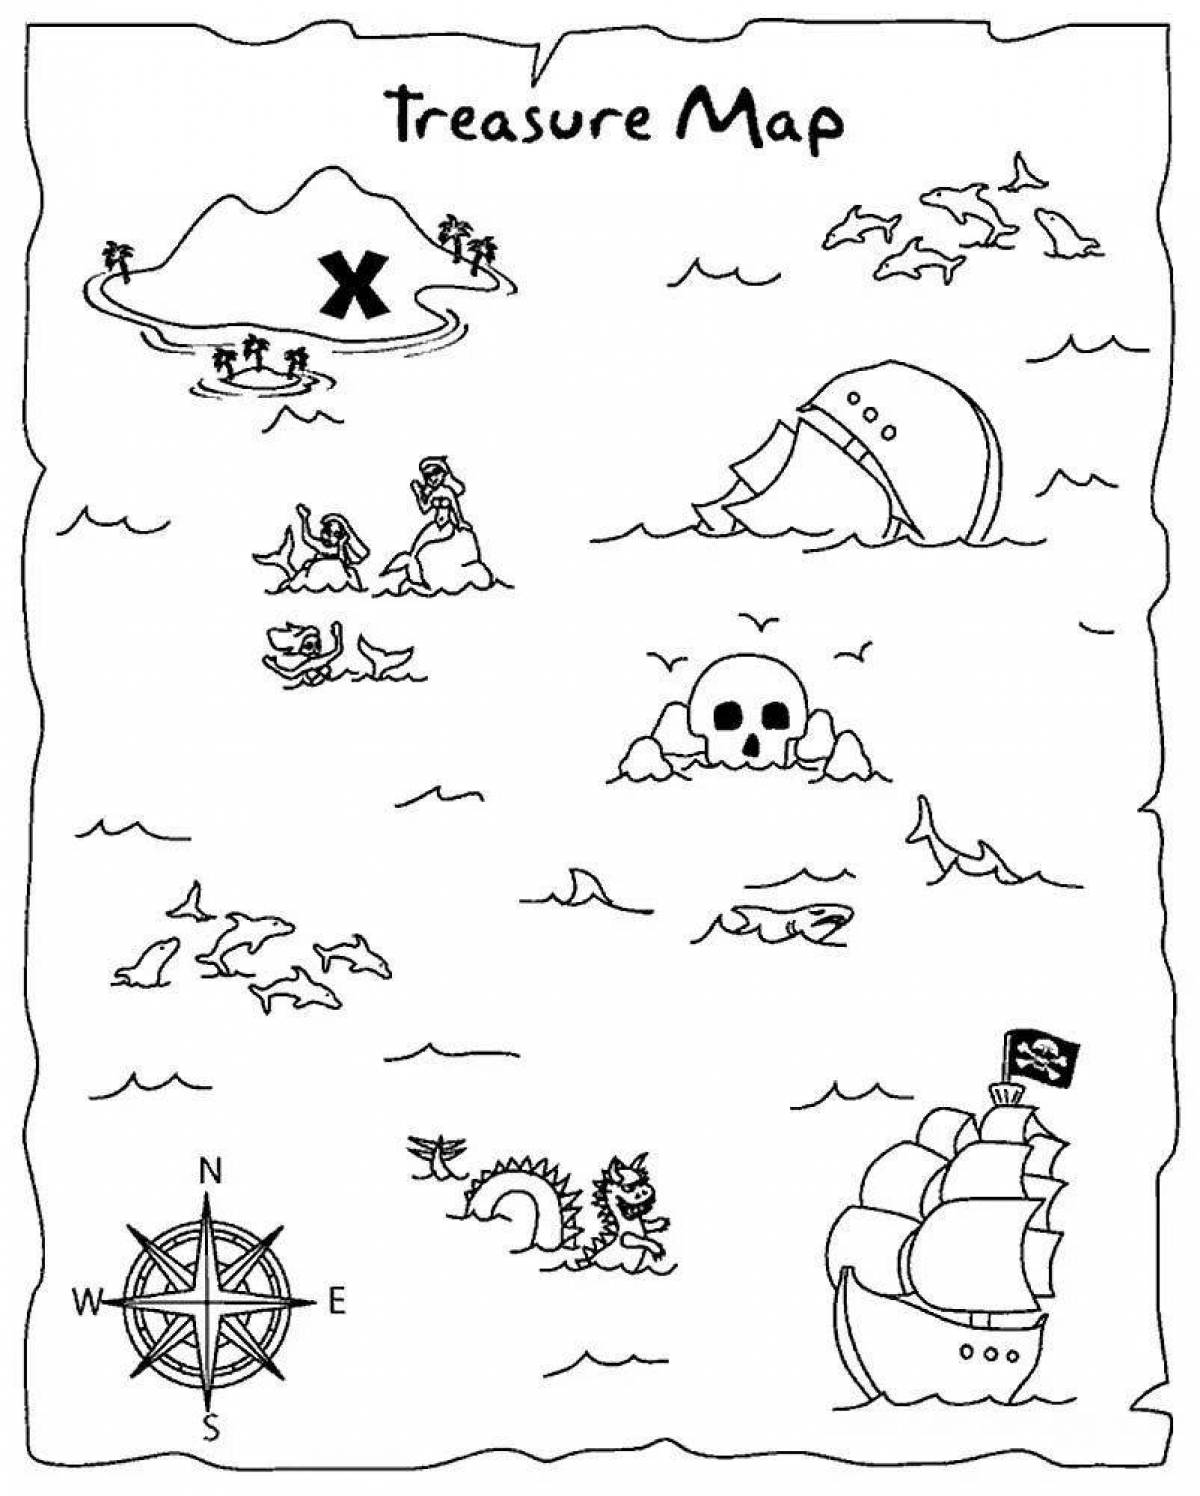 Colorful pirate map coloring page